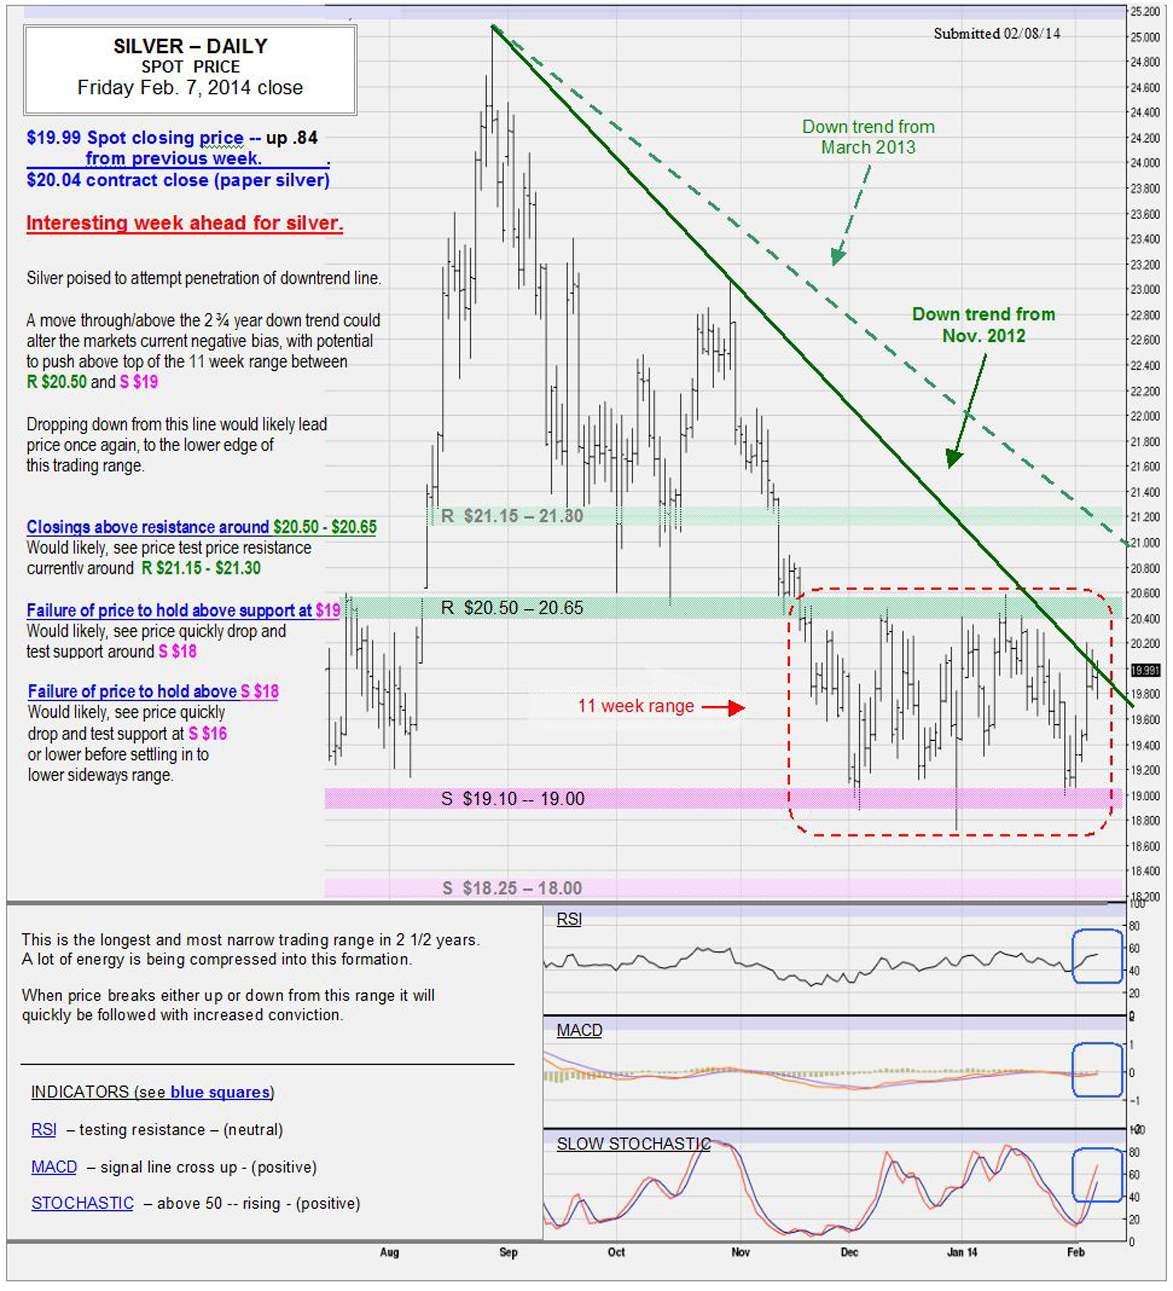 Feb 7, 2014 chart & commentary